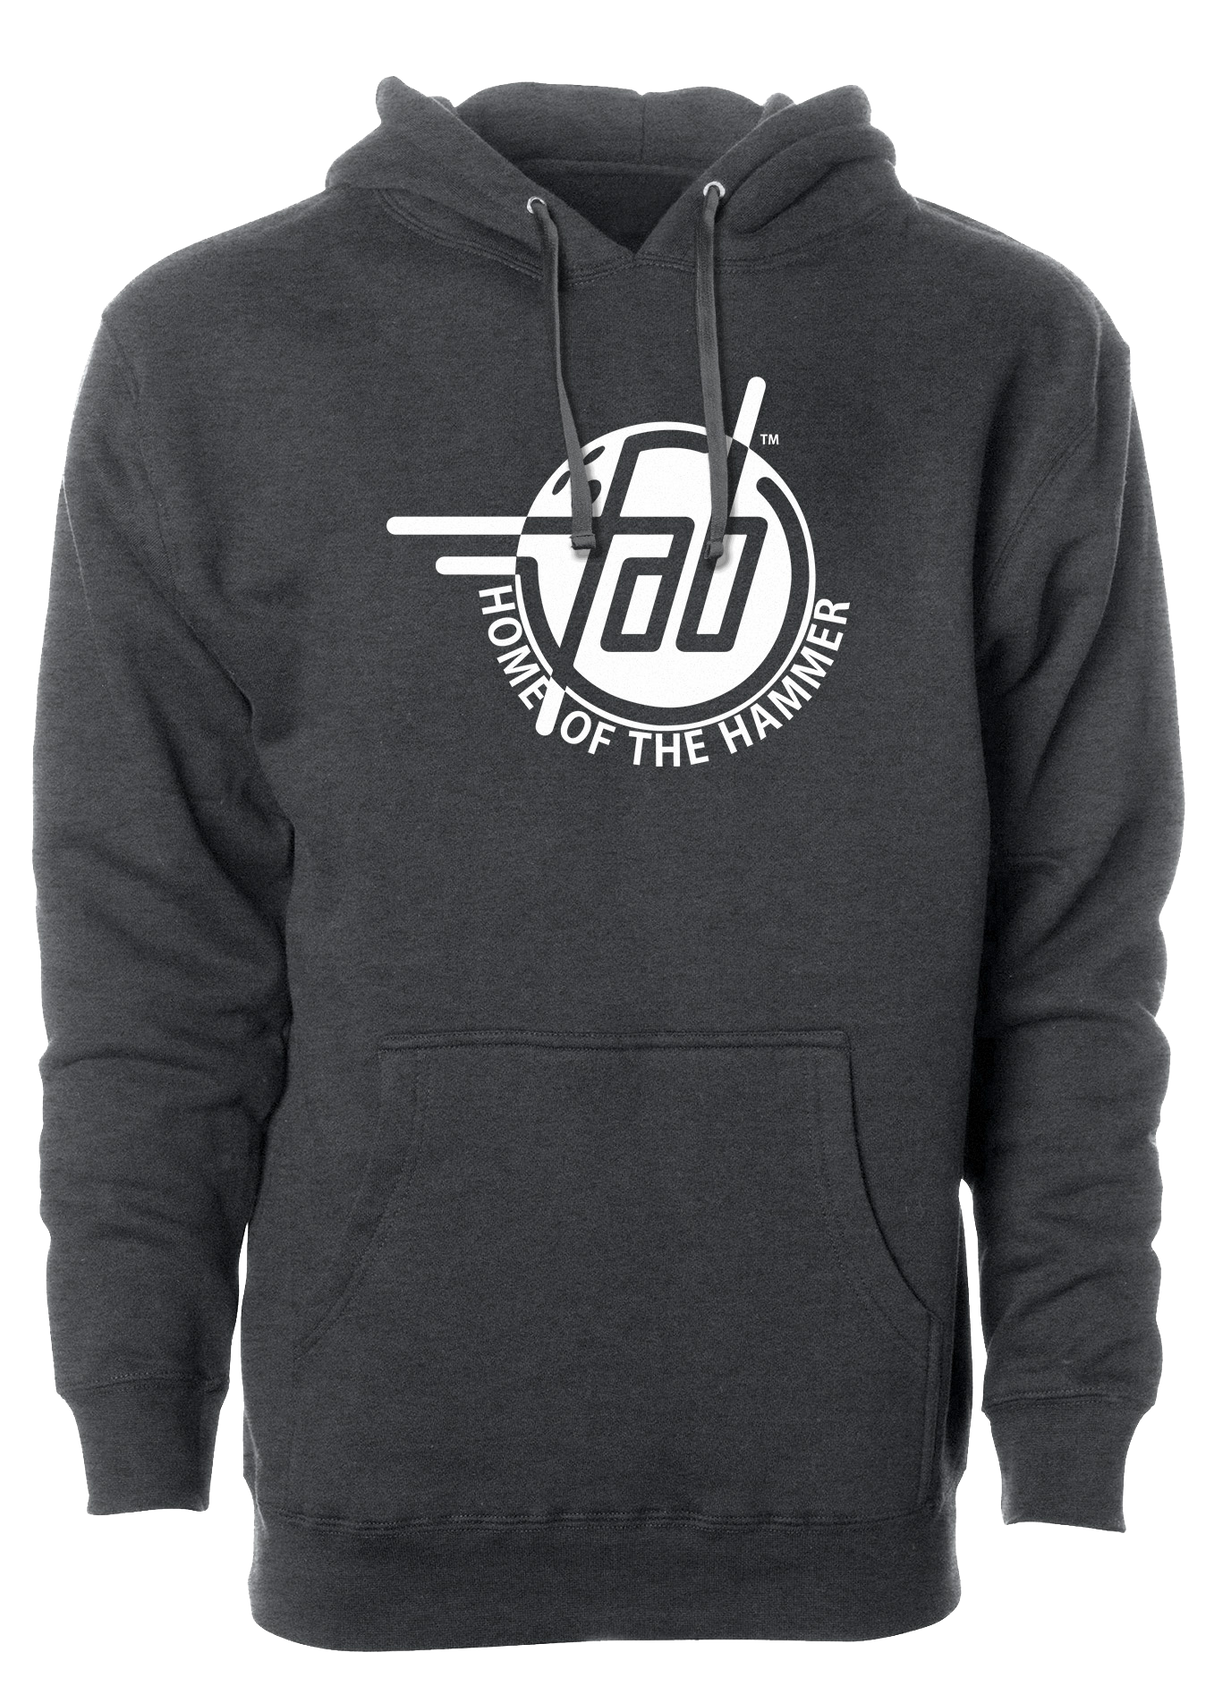 Faball Enterprises... The makers of the original Hammer. Look "Fab" in this bowling hoodie! This is the perfect gift for any bowler who liked the original urethane bowling balls.  Tshirt, tee, tee-shirt, tee shirt, Pro shop. League bowling team shirt. PBA. PWBA. USBC. Junior Gold. Youth bowling. Tournament t-shirt. Men's. Bowling Ball. Old School, throwback. Vintage.